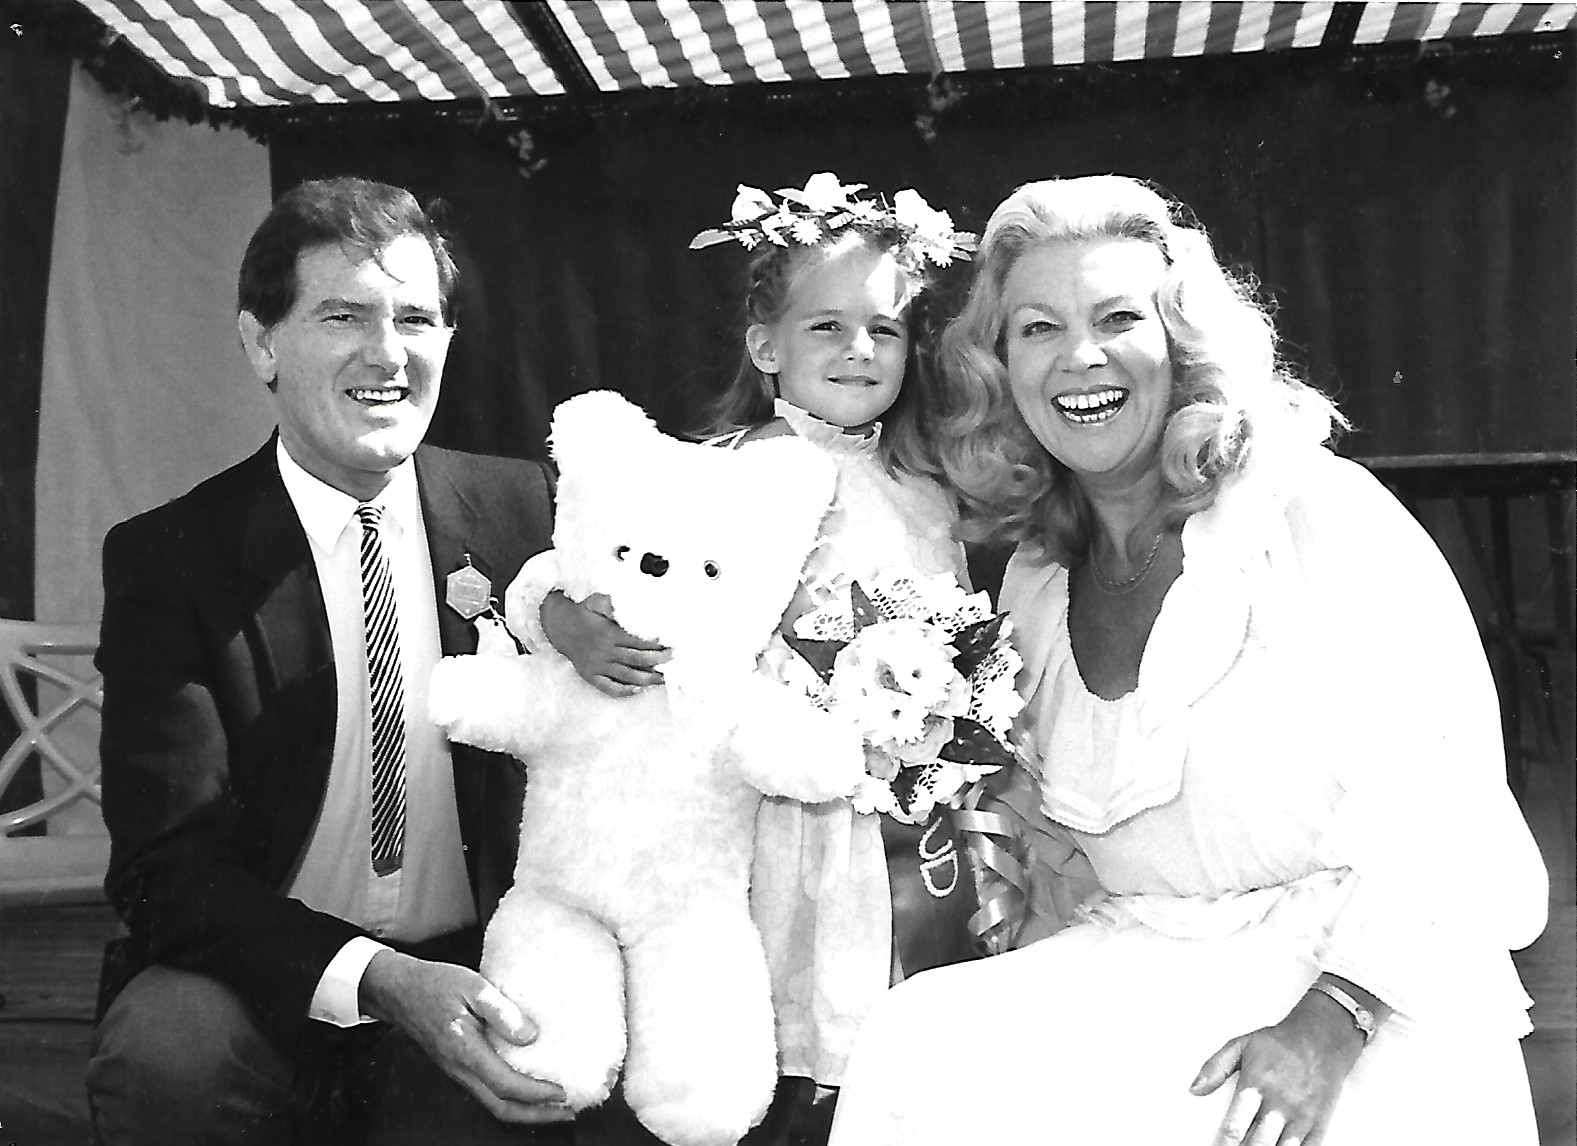 Lord Fearn (left) pictured with Southport hostess Connie Creighton (right) and a rose queen winner at the Ainsdale Show in July 1984. Ronnie Fearn was a Liberal candidate at the time, and would be elected as Southport MP three years later in 1987